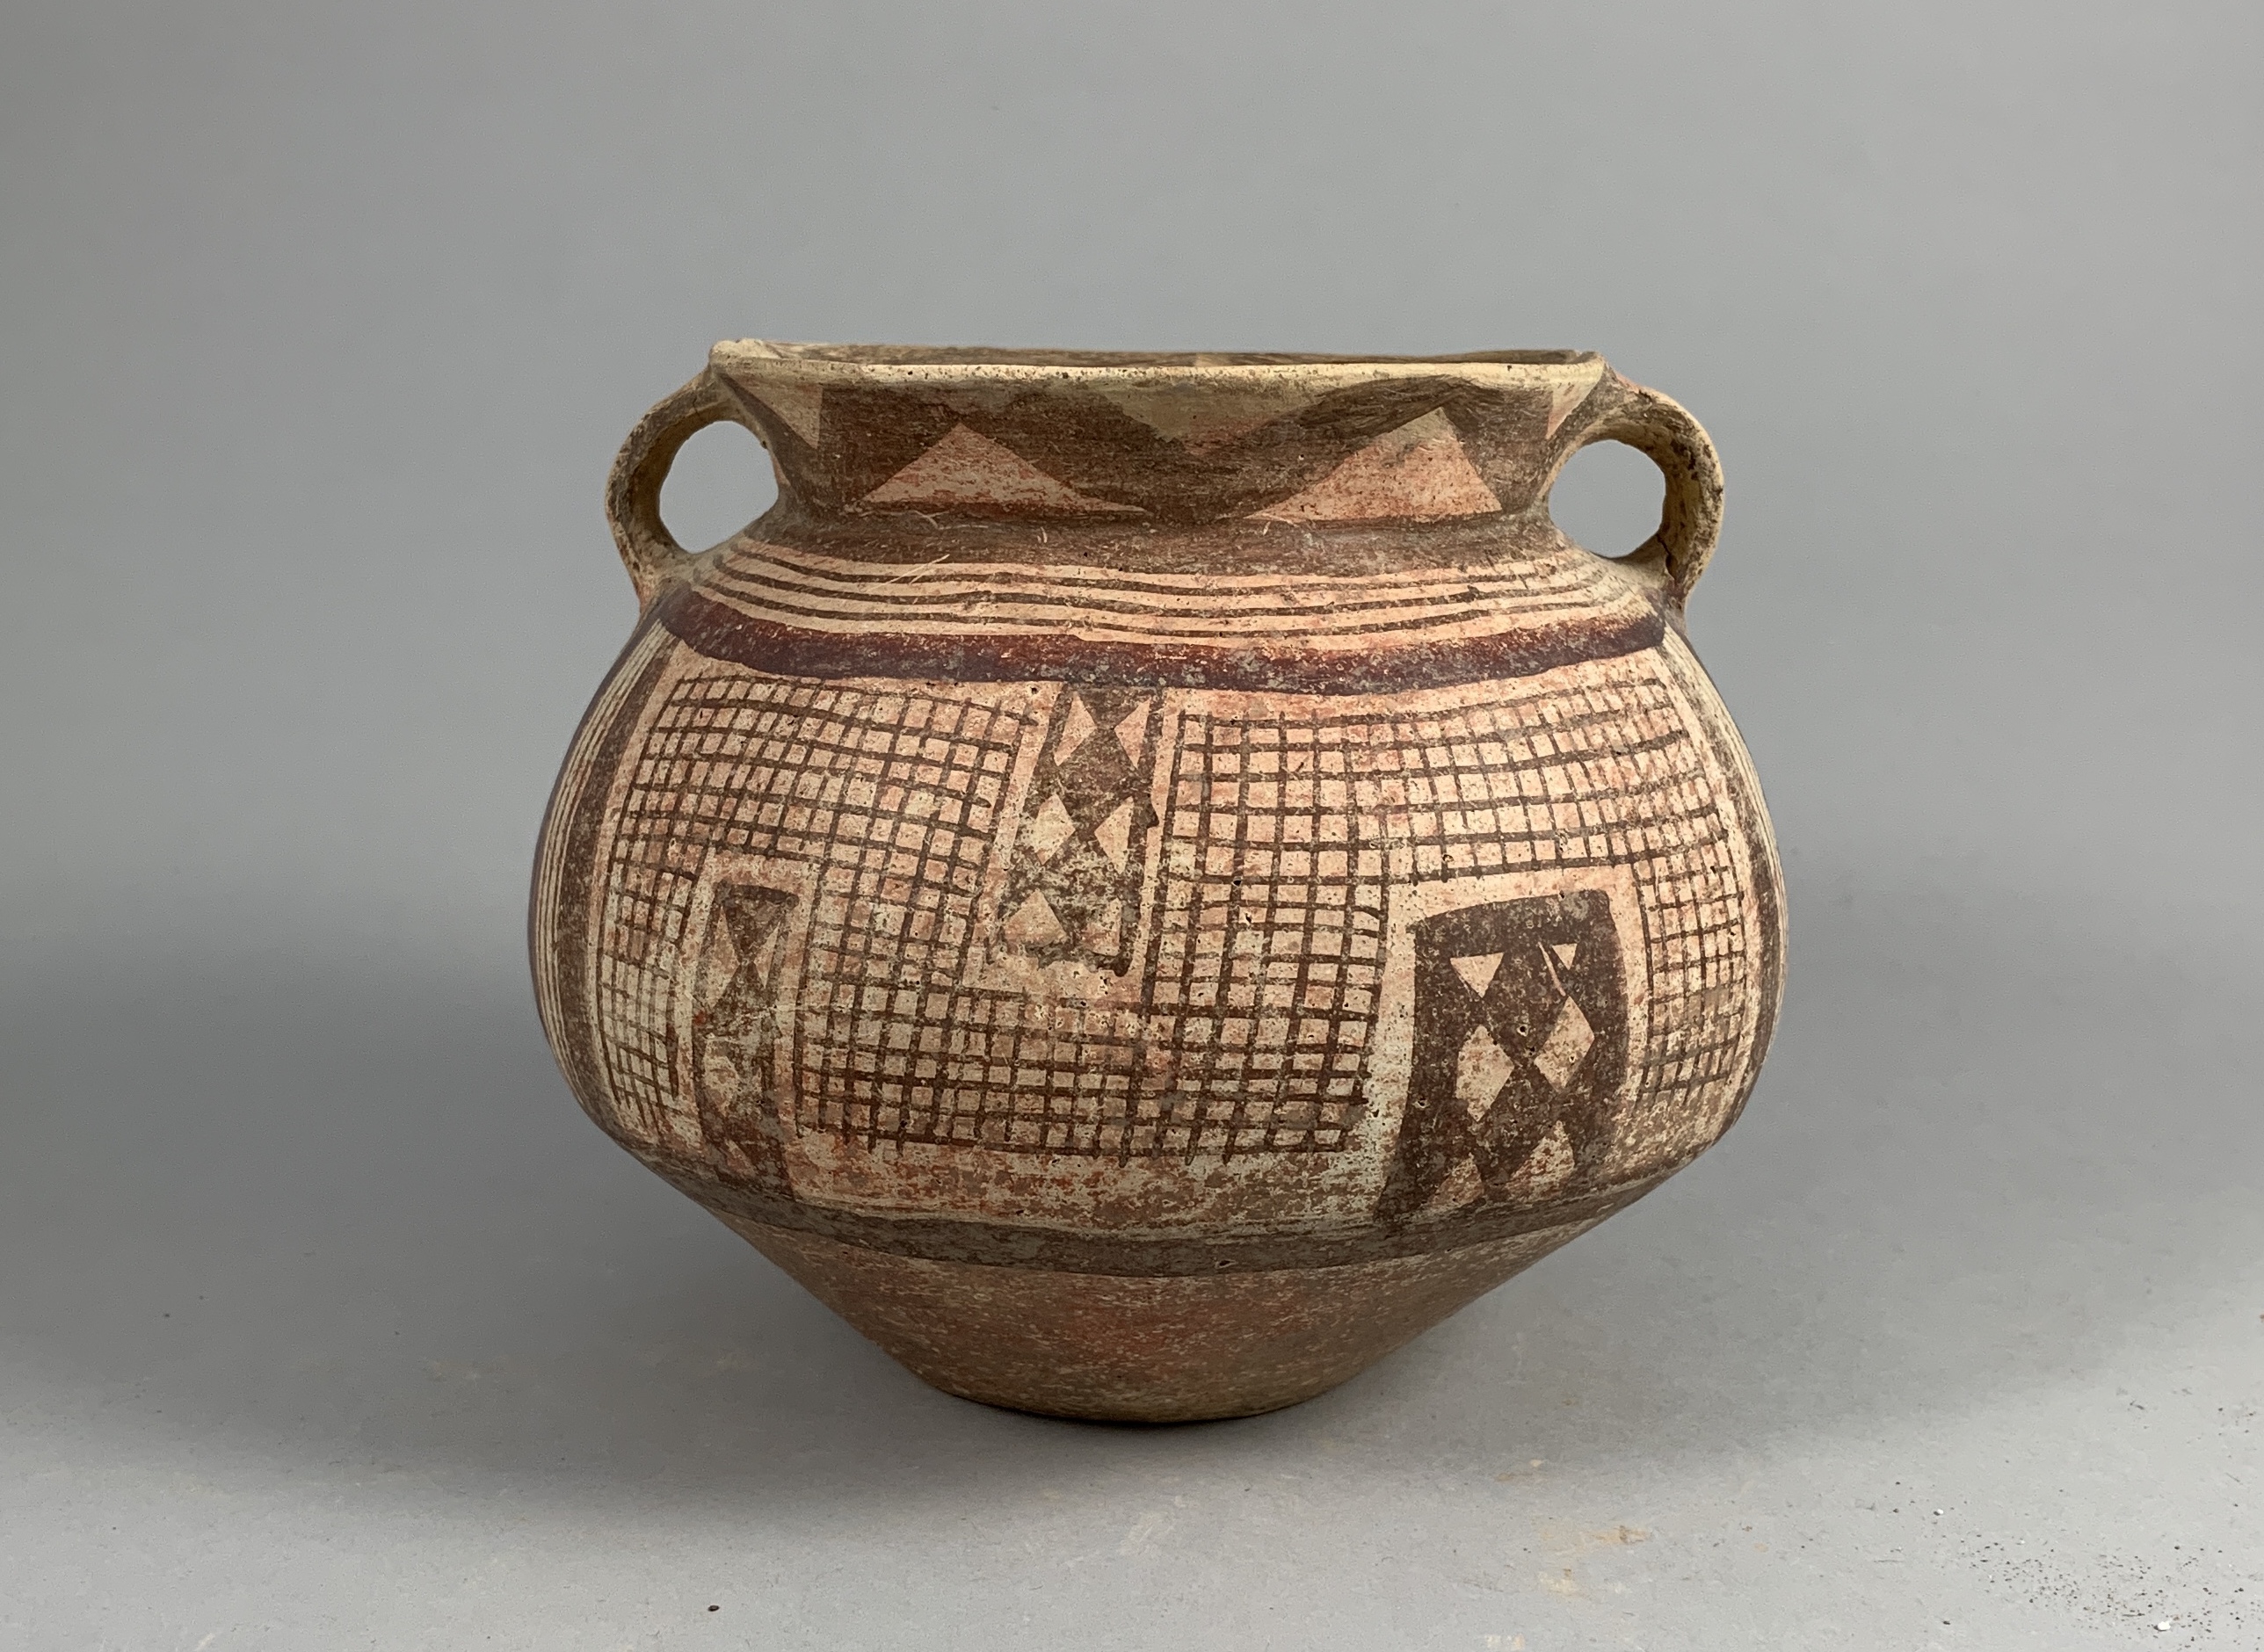 A Red Pottery Painted Vase, Gansu Province, Qijia Culture (2050-1700 Bc) - Image 3 of 16